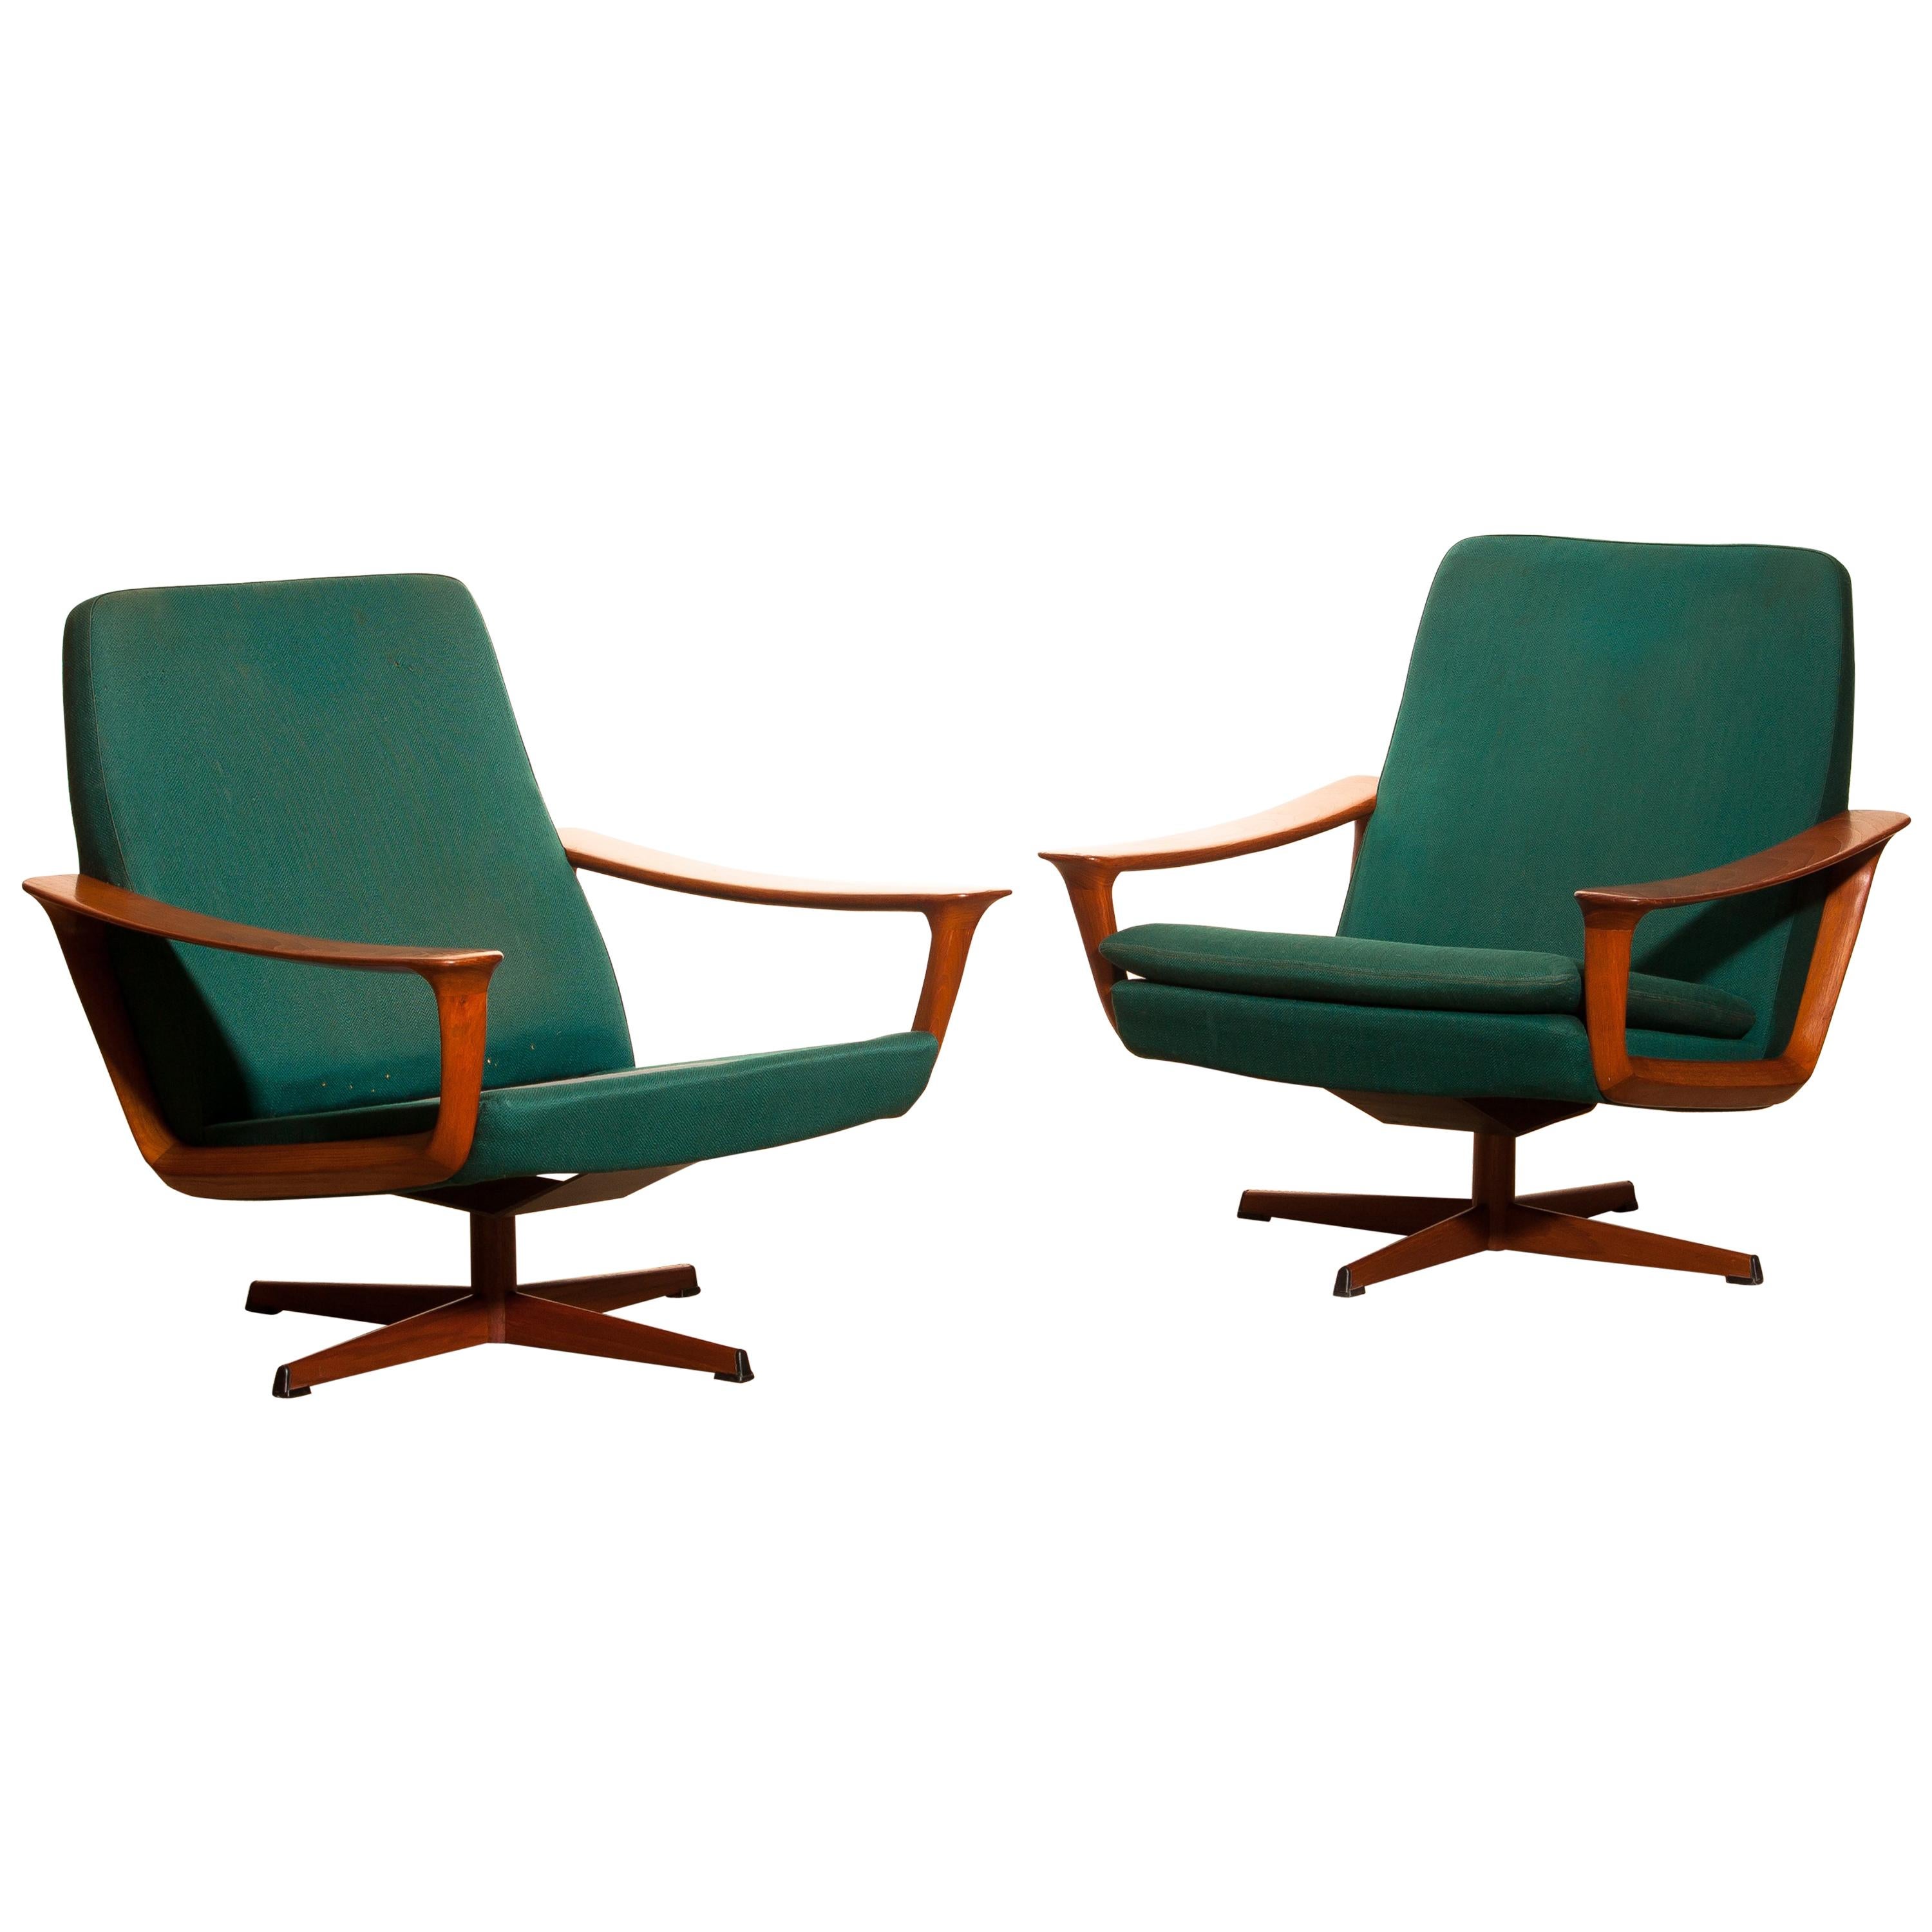 1960s, Teak Set of Two Swivel Chairs by Johannes Andersson for Trensum, Denmark